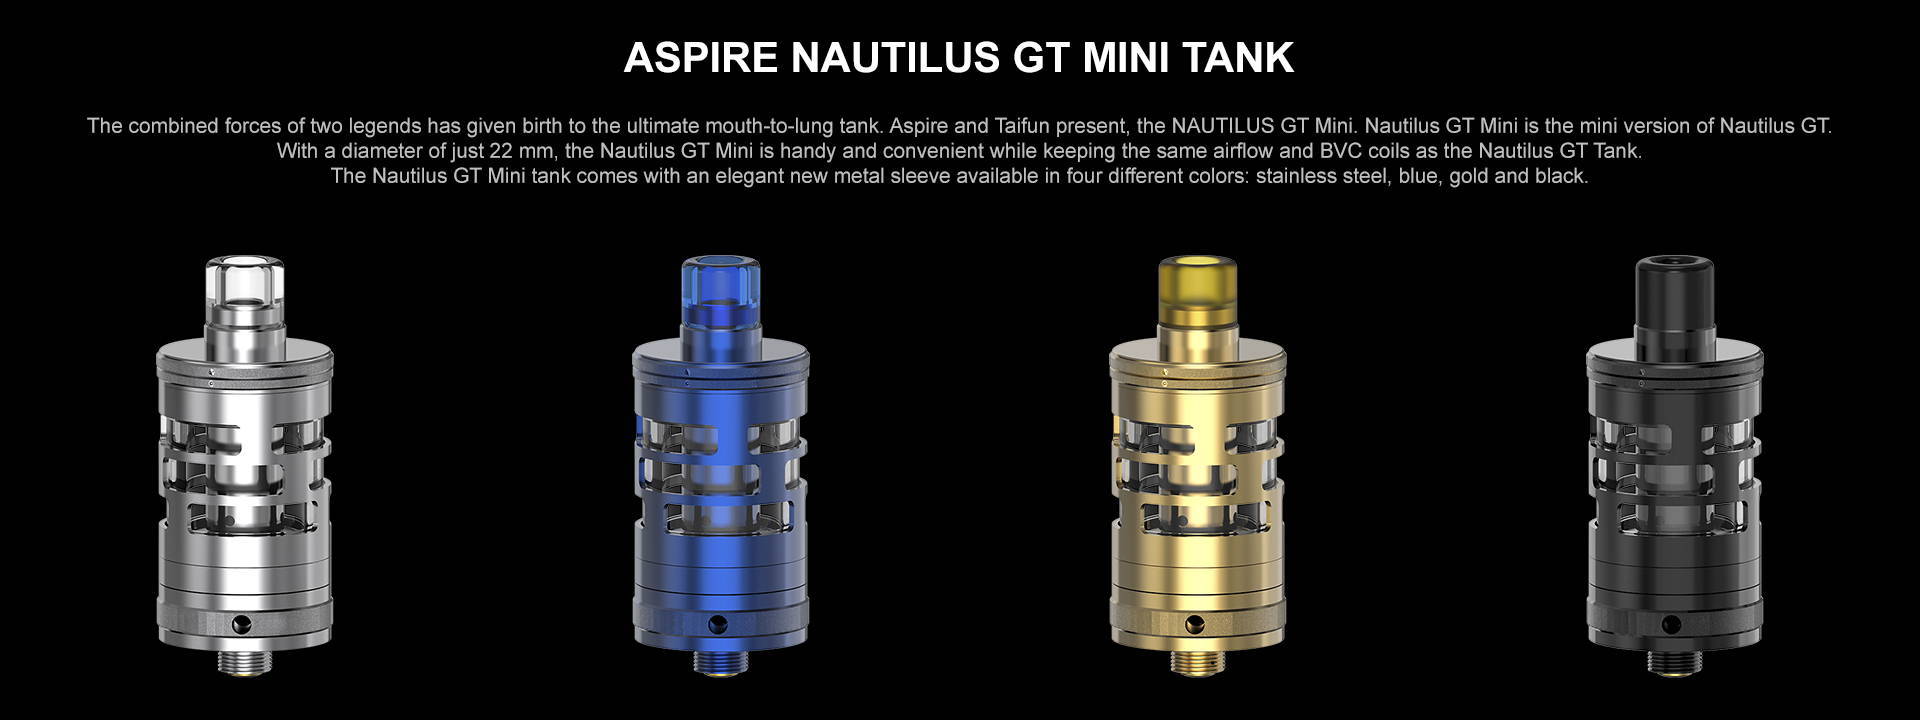 The combined forces of two legends has given birth to the ultimate mouth-to-lung tank. Aspire and Taifun present, the NAUTILUS GT Mini.  Nautilus GT Mini is the mini version of Nautilus GT. With a diameter of just 22 mm, the Nautilus GT Mini is handy and convenient while keeping the same airflow and BVC coils as the Nautilus GT Tank.  The Nautilus GT Mini tank comes with an elegant new metal sleeve available in four different colors: stainless steel, blue, gold and black.